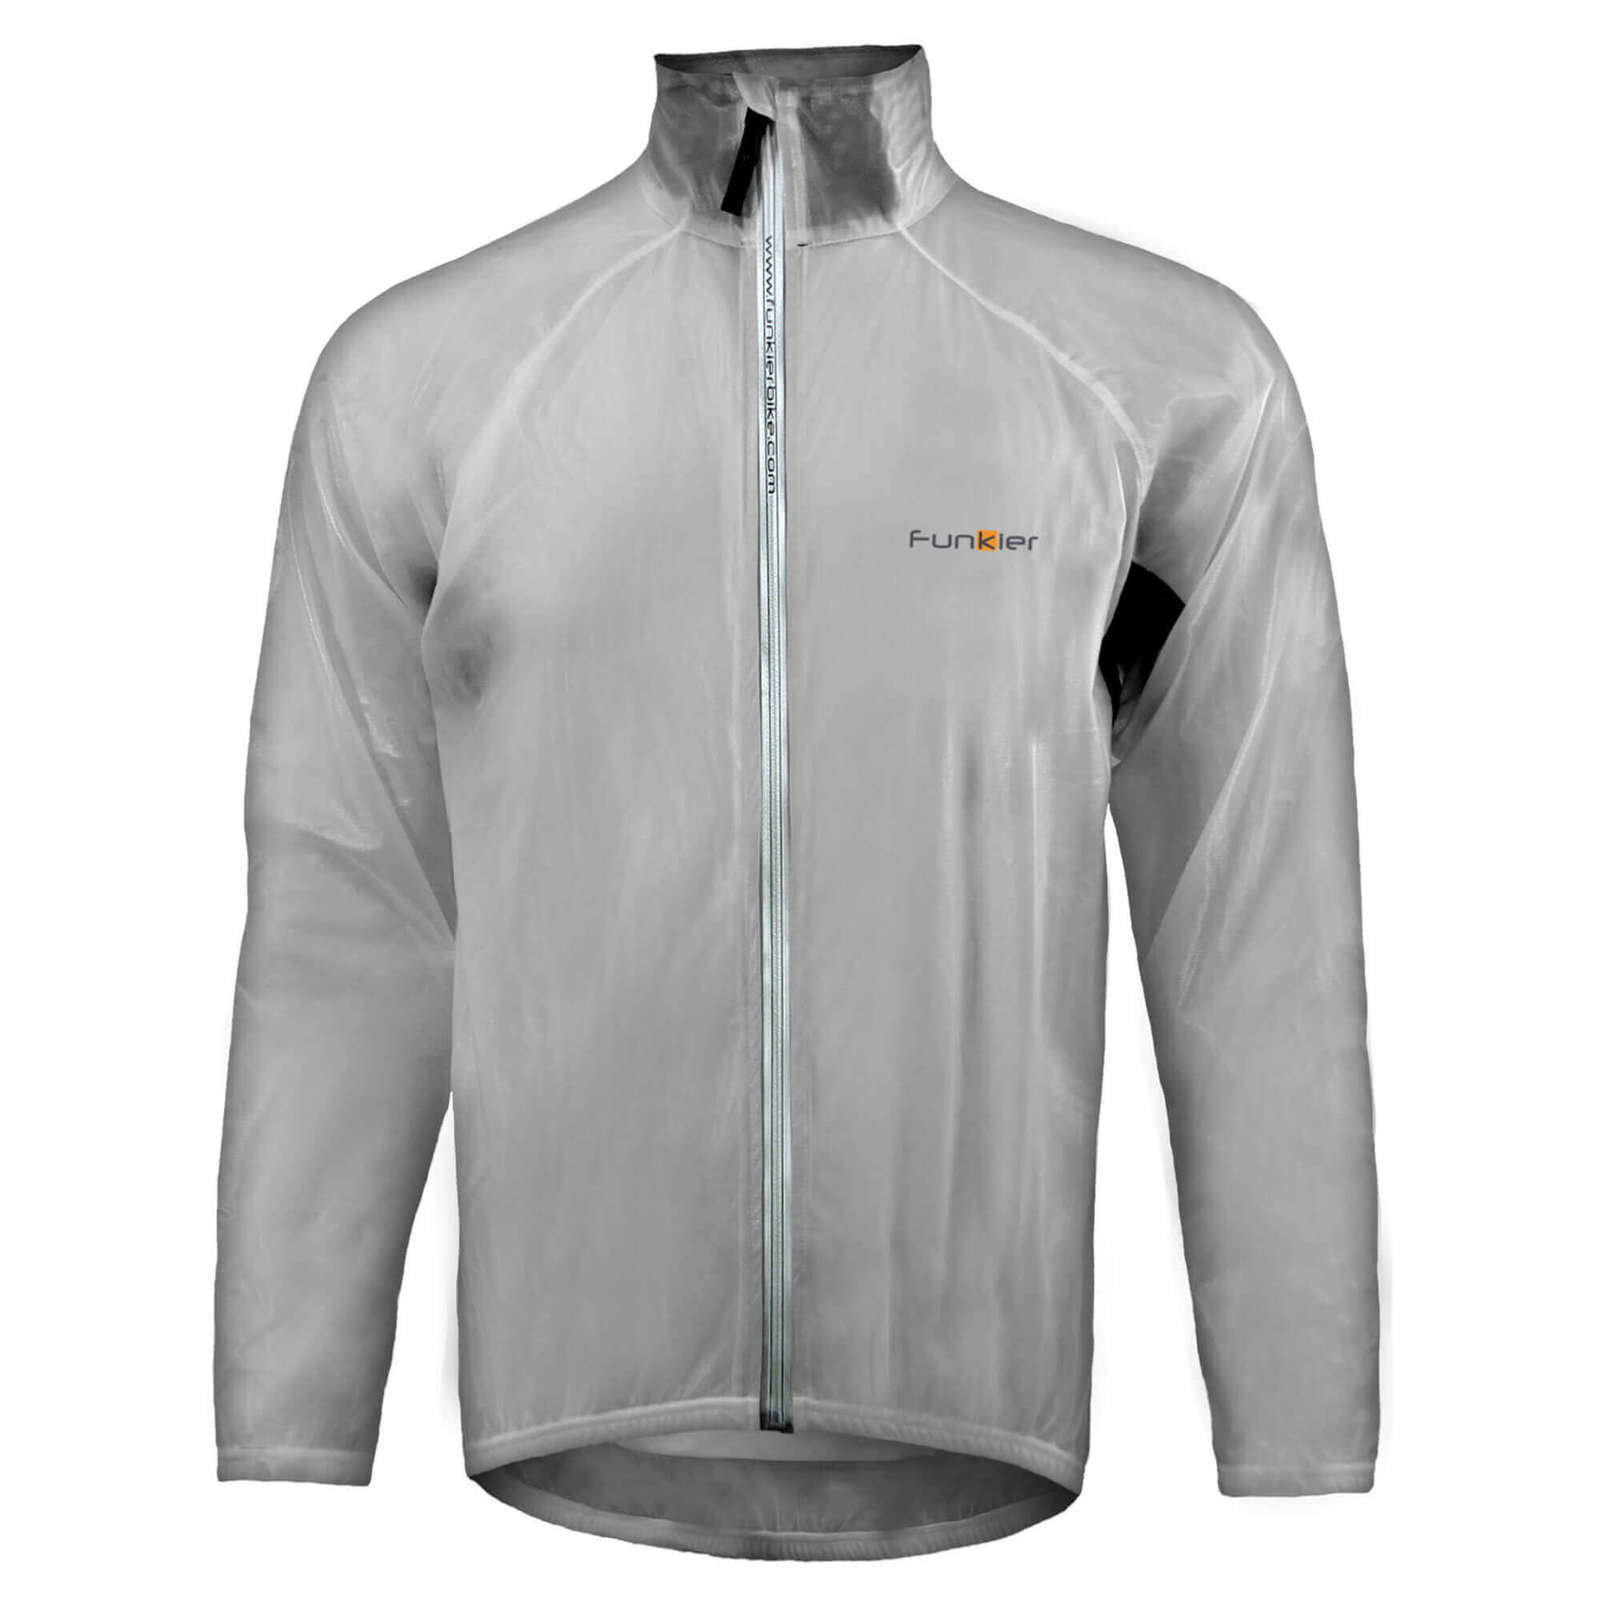 Cycling Jacket, Vest Funkier Lecco Clear L